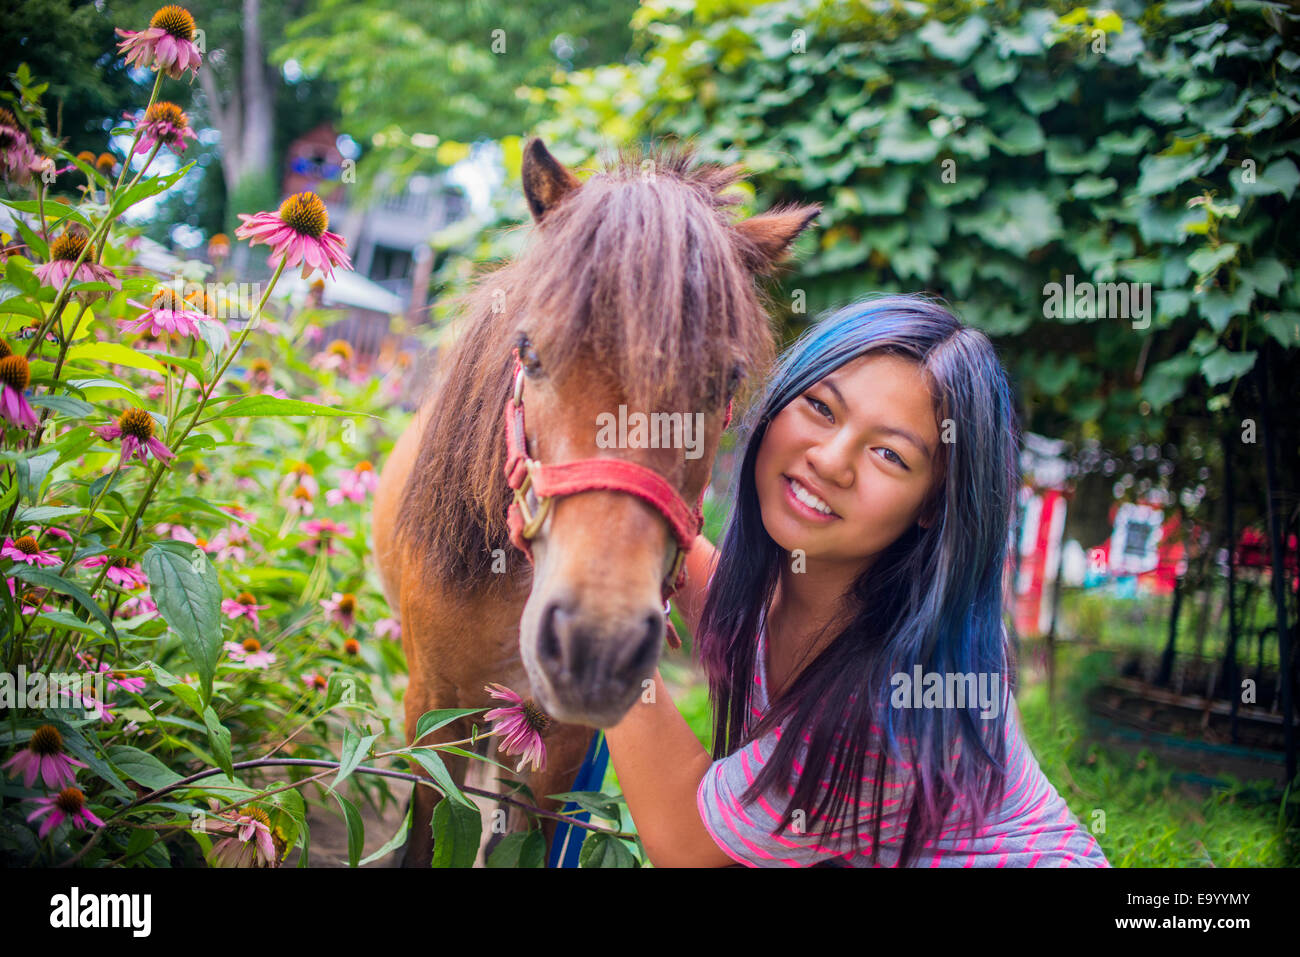 Portrait of teenage girl standing with pony, outdoors Stock Photo